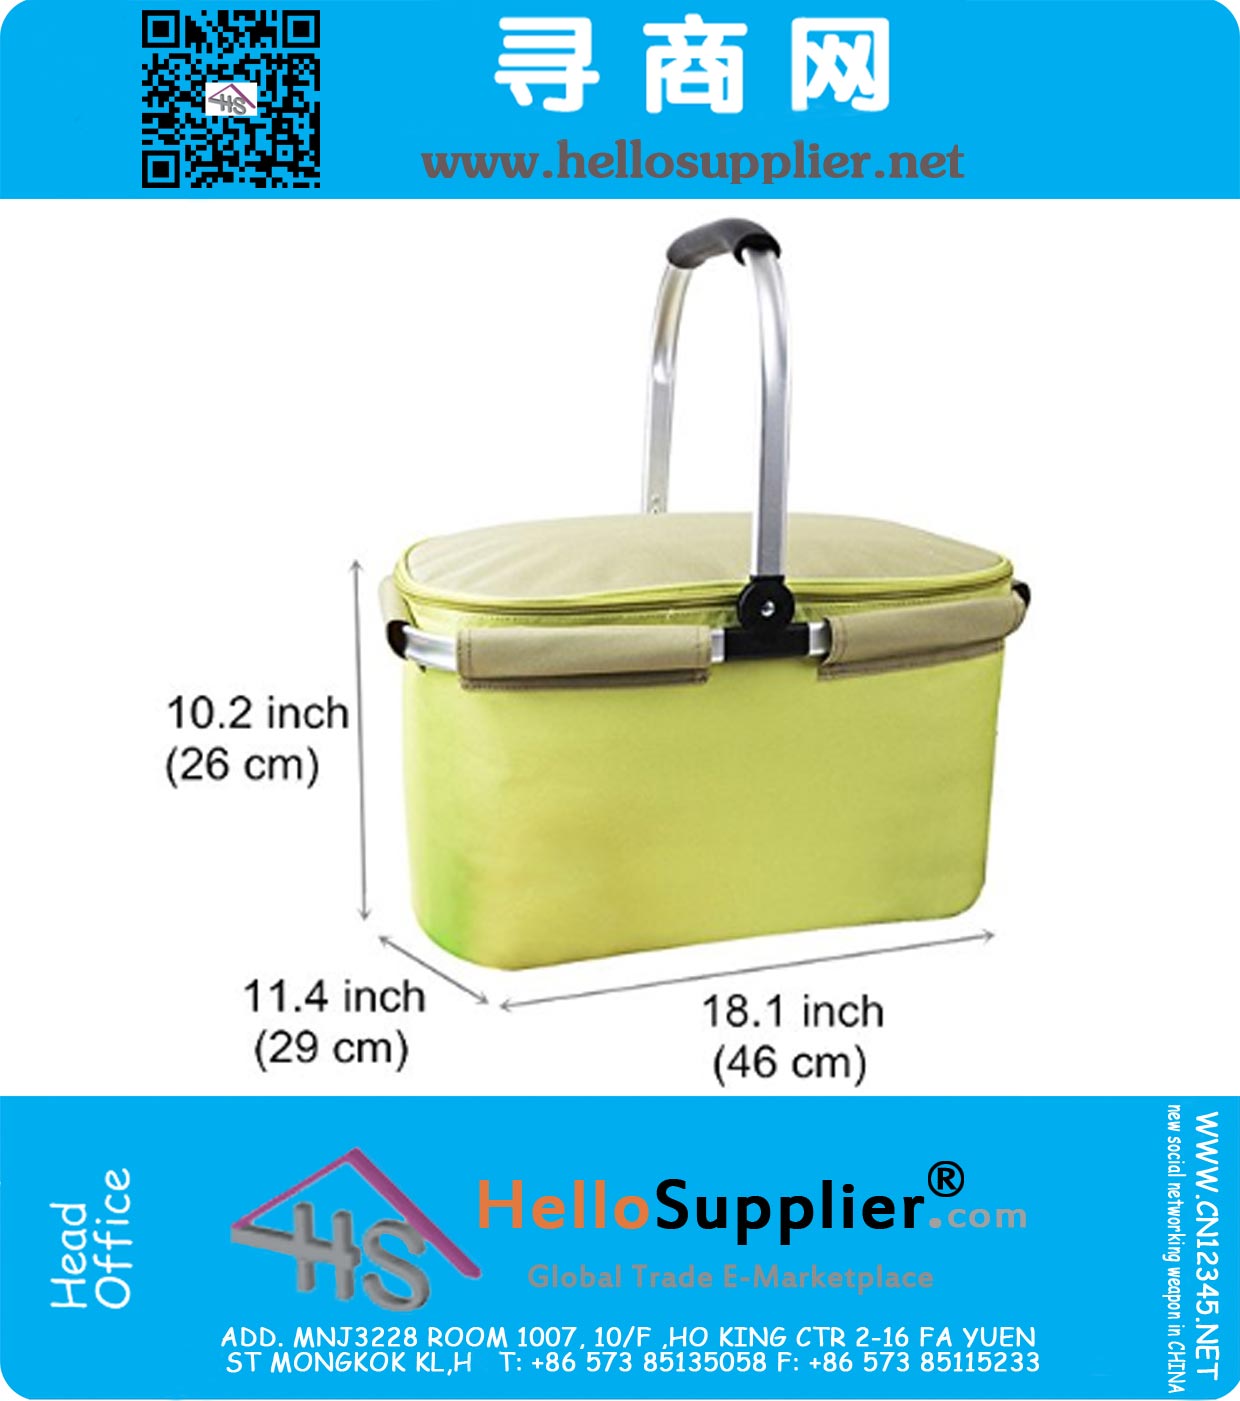 22L Insulated Picnic Basket 